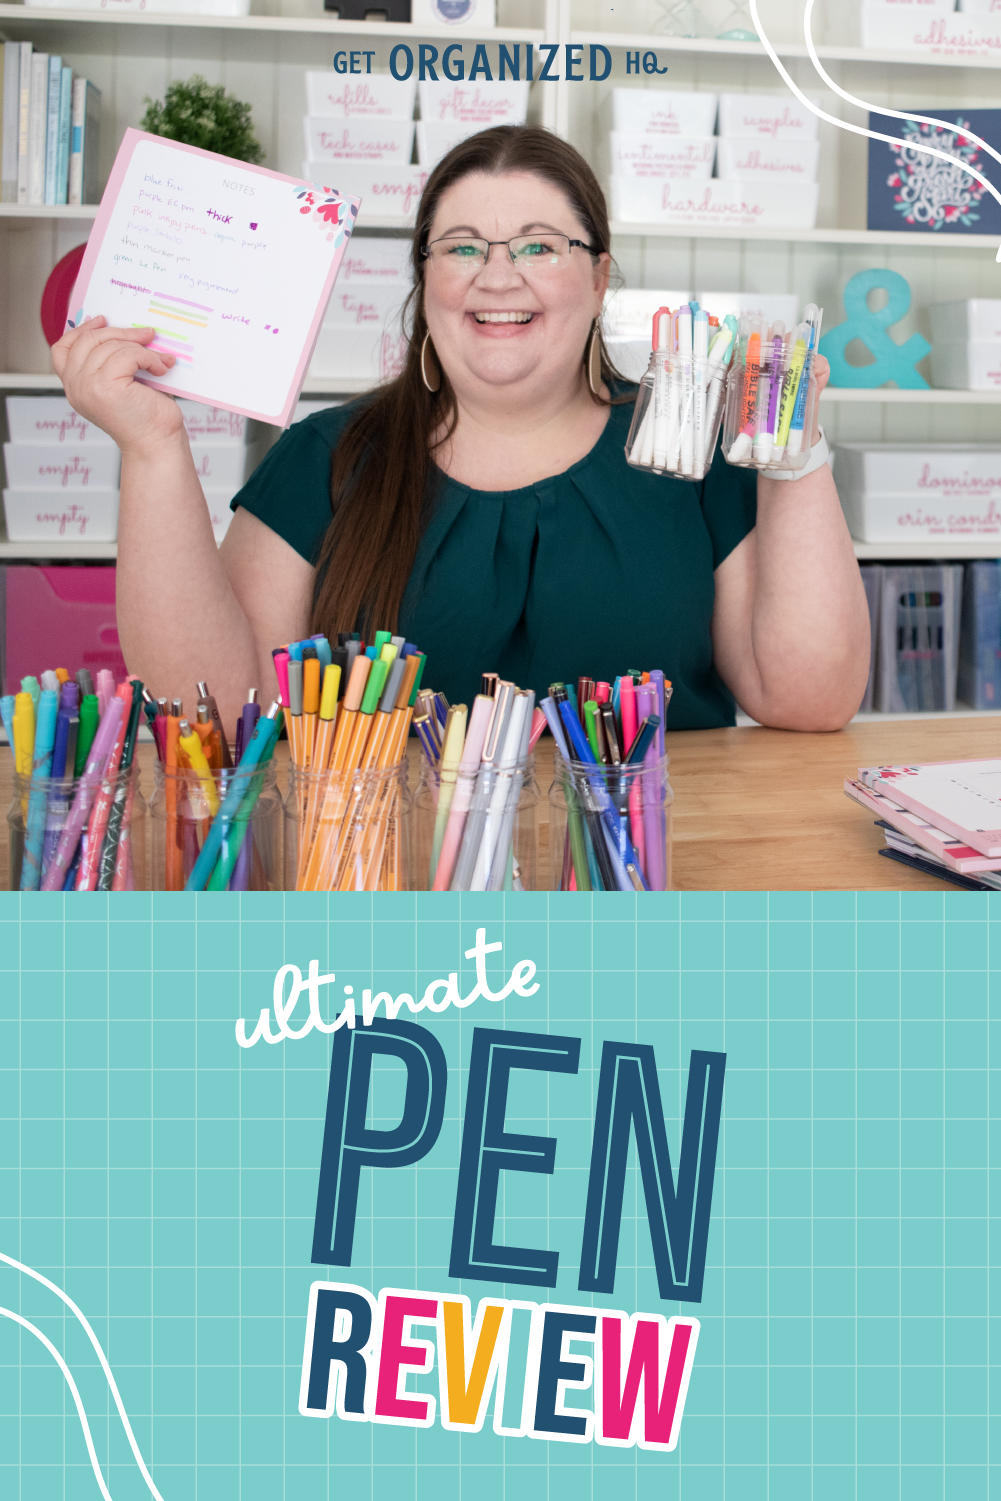 Best Pens for Writing in Planners- the ULTIMATE Pen Review - Get